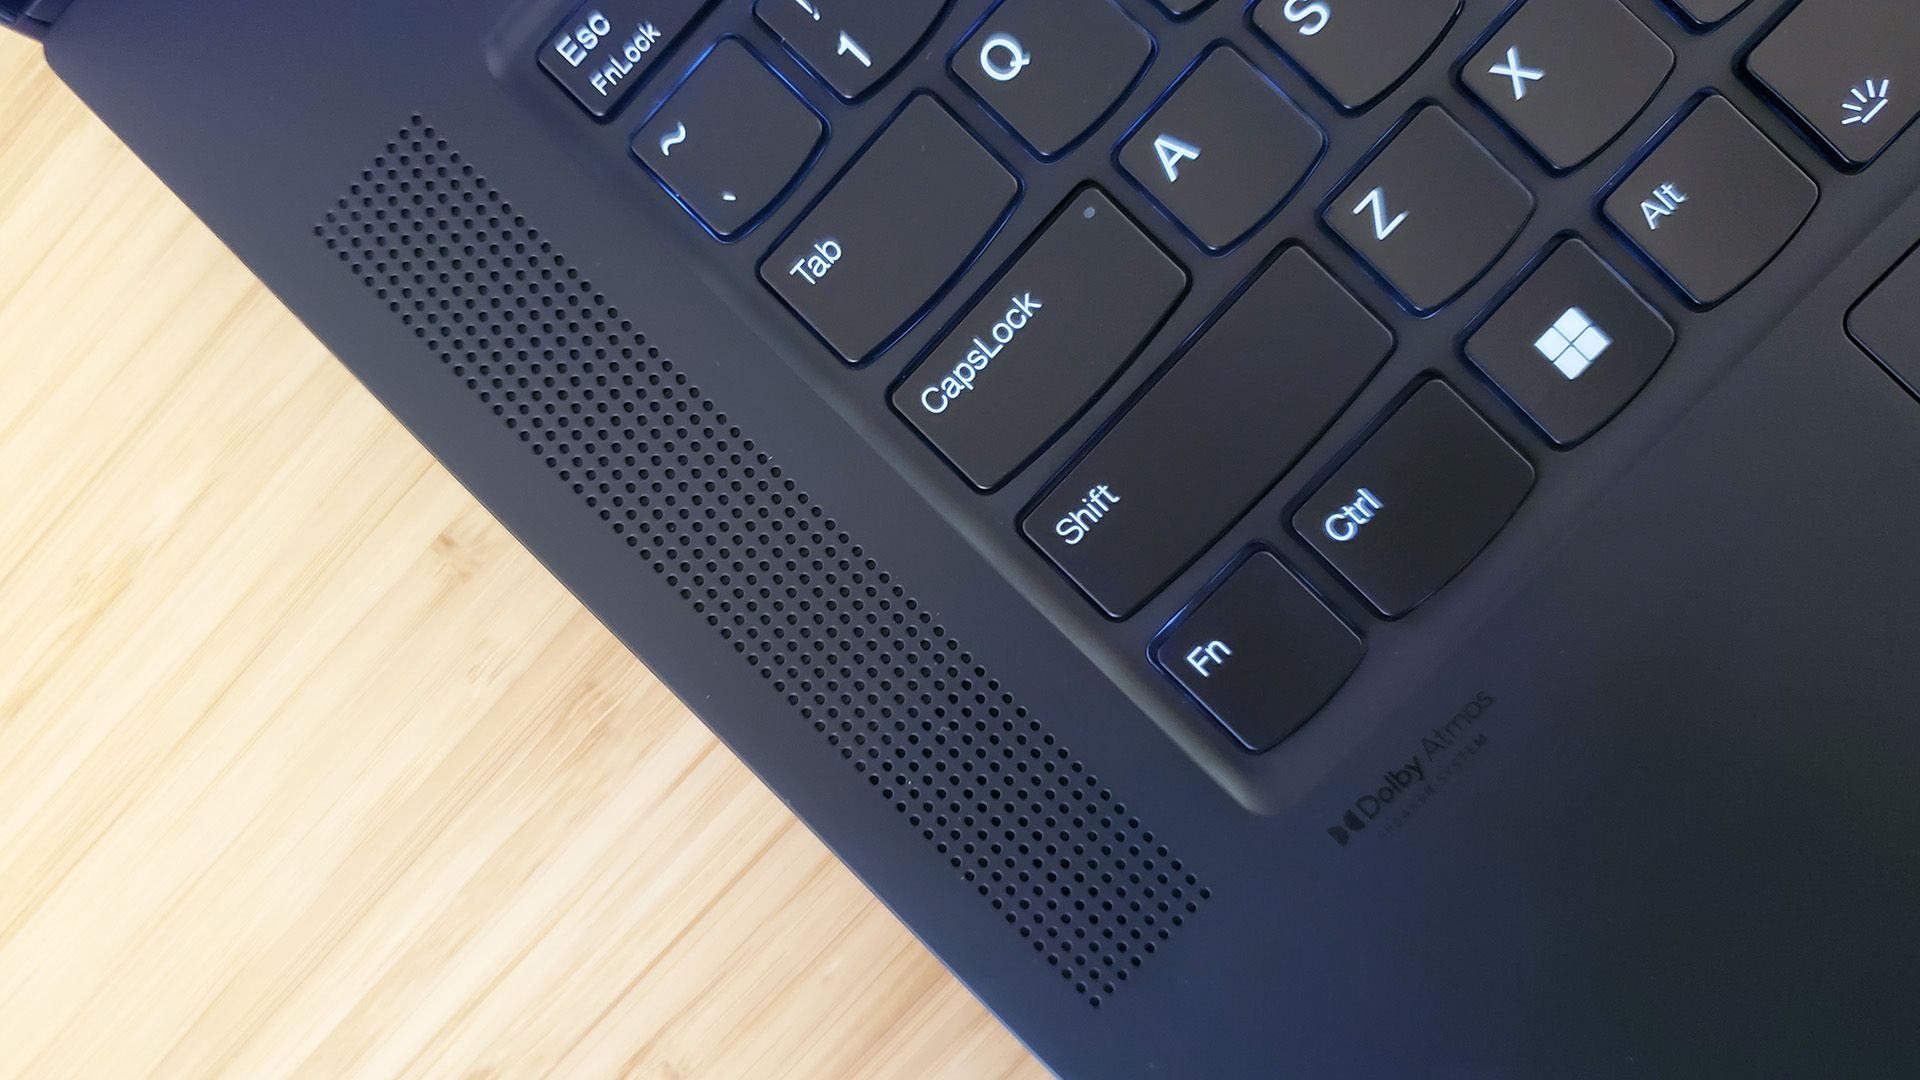 A close-up of the Lenovo ThinkPad X1 Extreme Gen 5 laptop's speaker system.